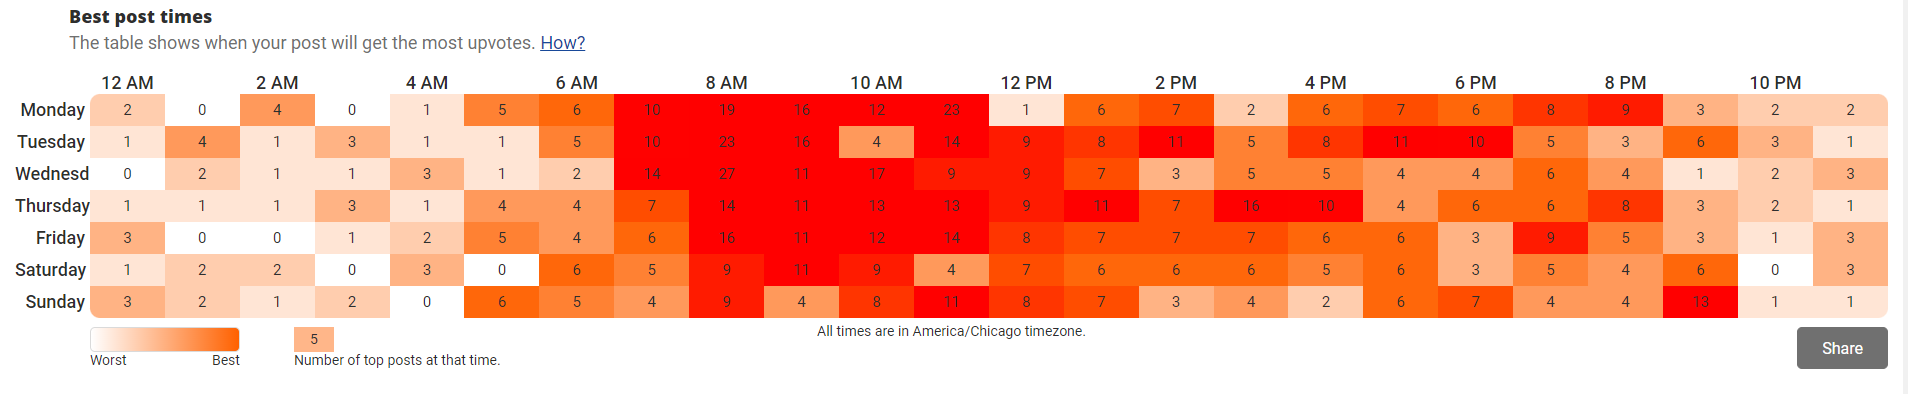 An hourly heatmap across days of the week. The graph is titled, "Best post times."